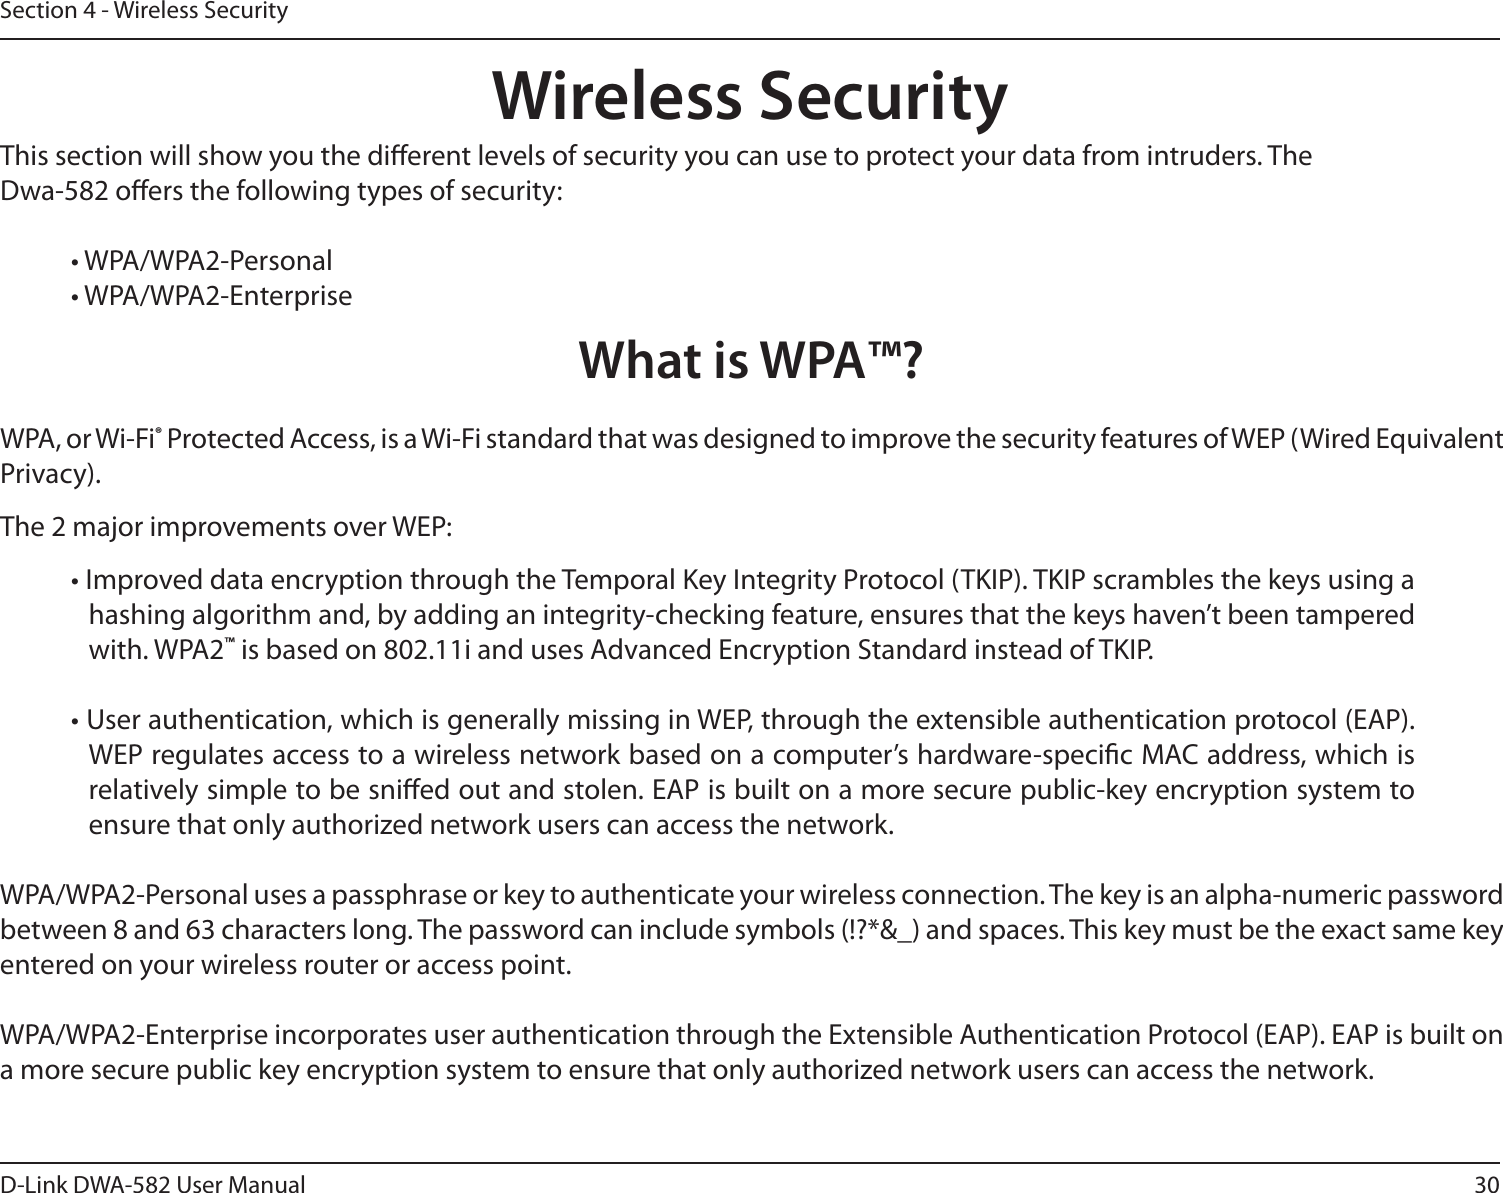 30D-Link DWA-582 User ManualSection 4 - Wireless SecurityWireless SecurityThis section will show you the dierent levels of security you can use to protect your data from intruders. The Dwa-582 oers the following types of security:• WPA/WPA2-Personal     • WPA/WPA2-EnterpriseWhat is WPA™?WPA, or Wi-Fi® Protected Access, is a Wi-Fi standard that was designed to improve the security features of WEP (Wired Equivalent Privacy).  The 2 major improvements over WEP: • Improved data encryption through the Temporal Key Integrity Protocol (TKIP). TKIP scrambles the keys using a hashing algorithm and, by adding an integrity-checking feature, ensures that the keys haven’t been tampered with. WPA2™ is based on 802.11i and uses Advanced Encryption Standard instead of TKIP.• User authentication, which is generally missing in WEP, through the extensible authentication protocol (EAP). WEP regulates access to a wireless network based on a computer’s hardware-specic MAC address, which is relatively simple to be snied out and stolen. EAP is built on a more secure public-key encryption system to ensure that only authorized network users can access the network.WPA/WPA2-Personal uses a passphrase or key to authenticate your wireless connection. The key is an alpha-numeric password between 8 and 63 characters long. The password can include symbols (!?*&amp;_) and spaces. This key must be the exact same key entered on your wireless router or access point.WPA/WPA2-Enterprise incorporates user authentication through the Extensible Authentication Protocol (EAP). EAP is built on a more secure public key encryption system to ensure that only authorized network users can access the network.